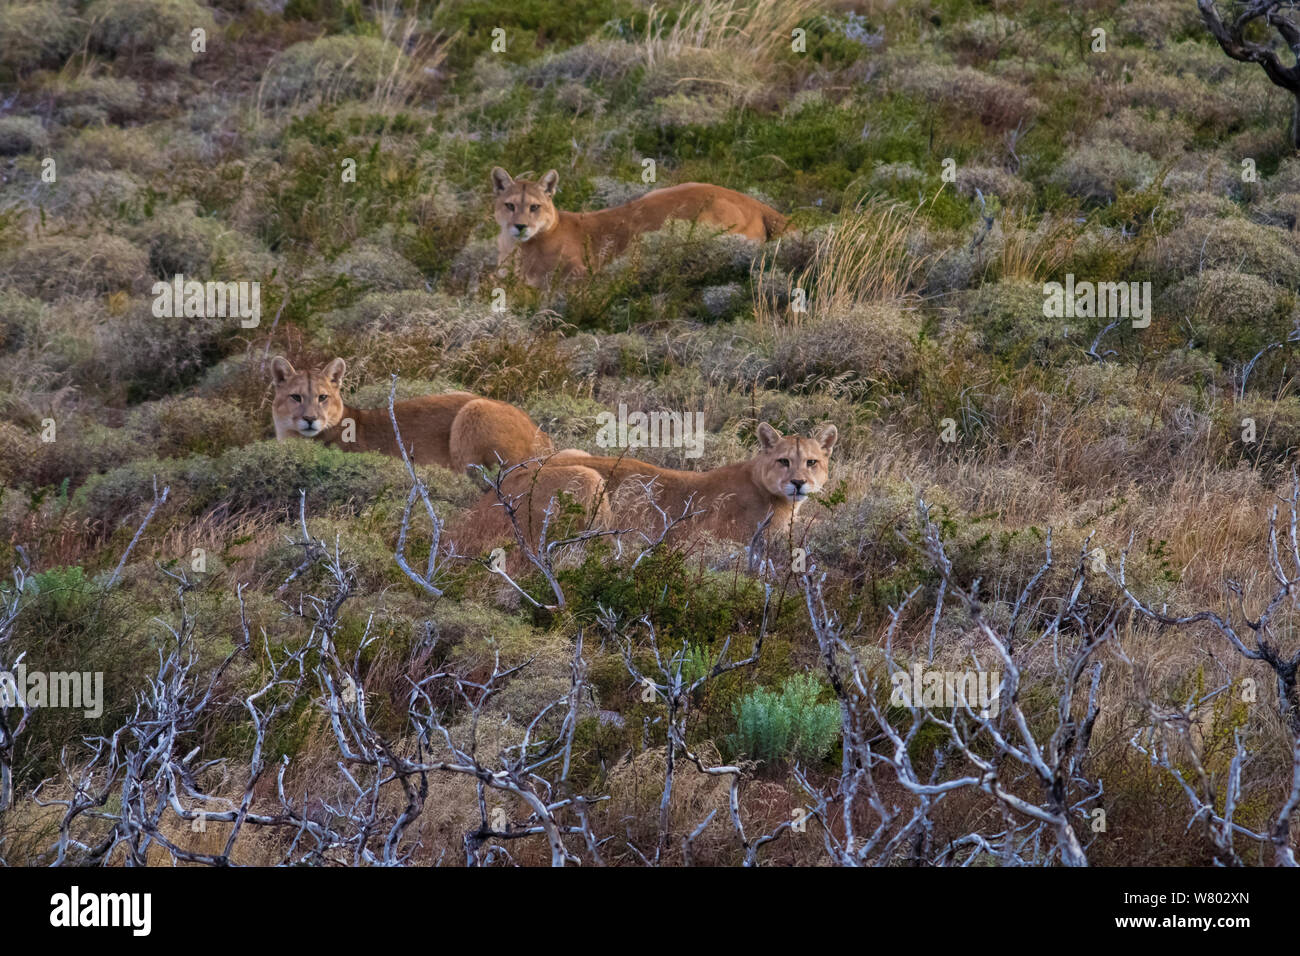 Cougar (Puma concolor) group of three, Mountain Lion, Torres del Paine National Park, Chile Stock Photo